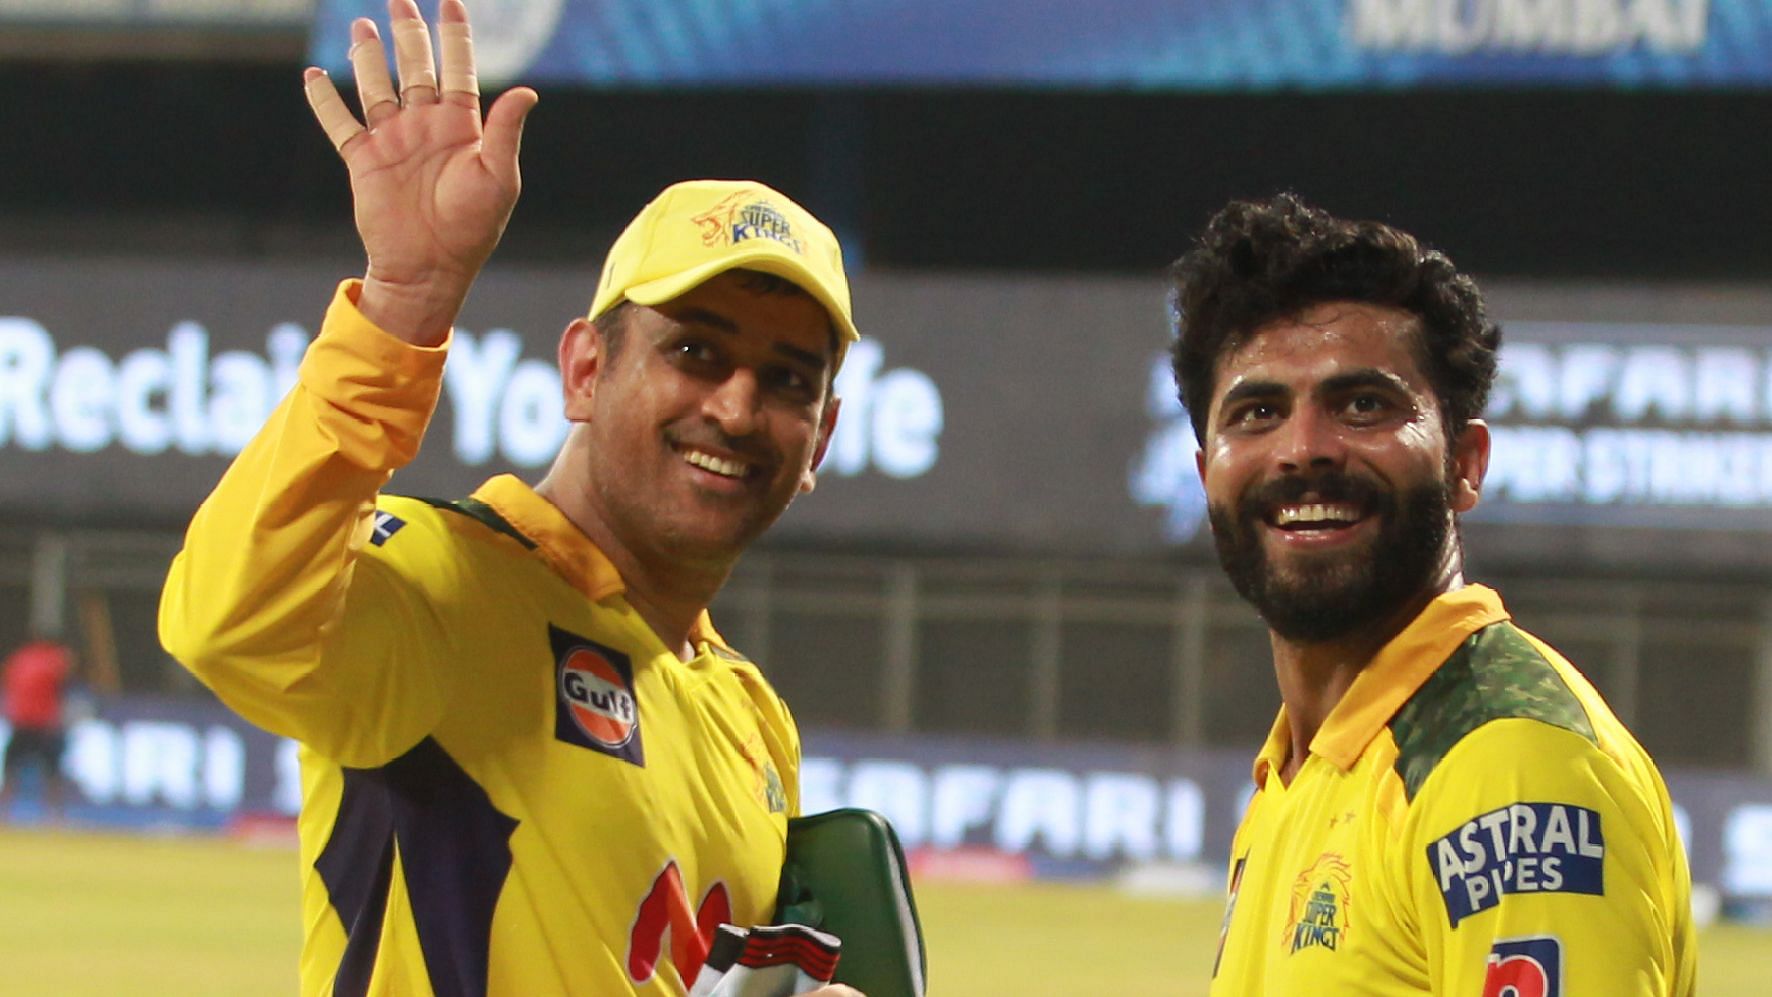 Ravindra Jadeja’s all-round performance helped CSK beat RCB and go on top of the IPL standings.